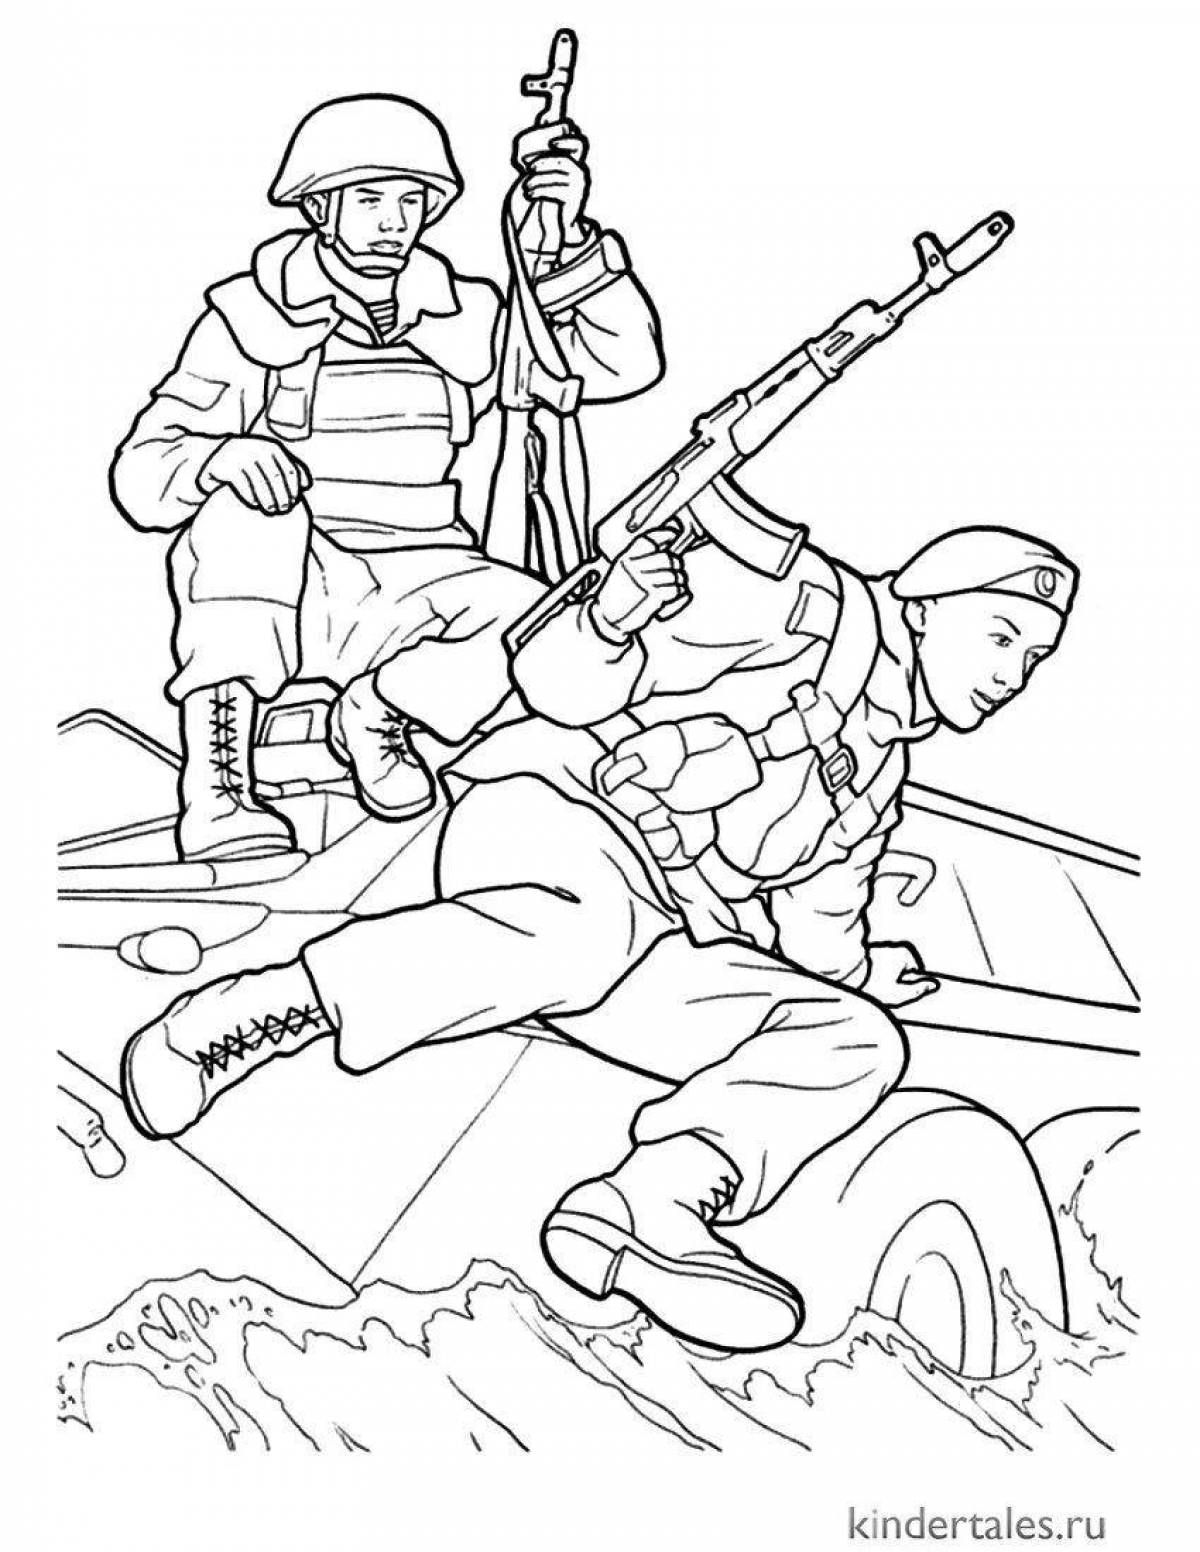 Colouring merry soldier for kids